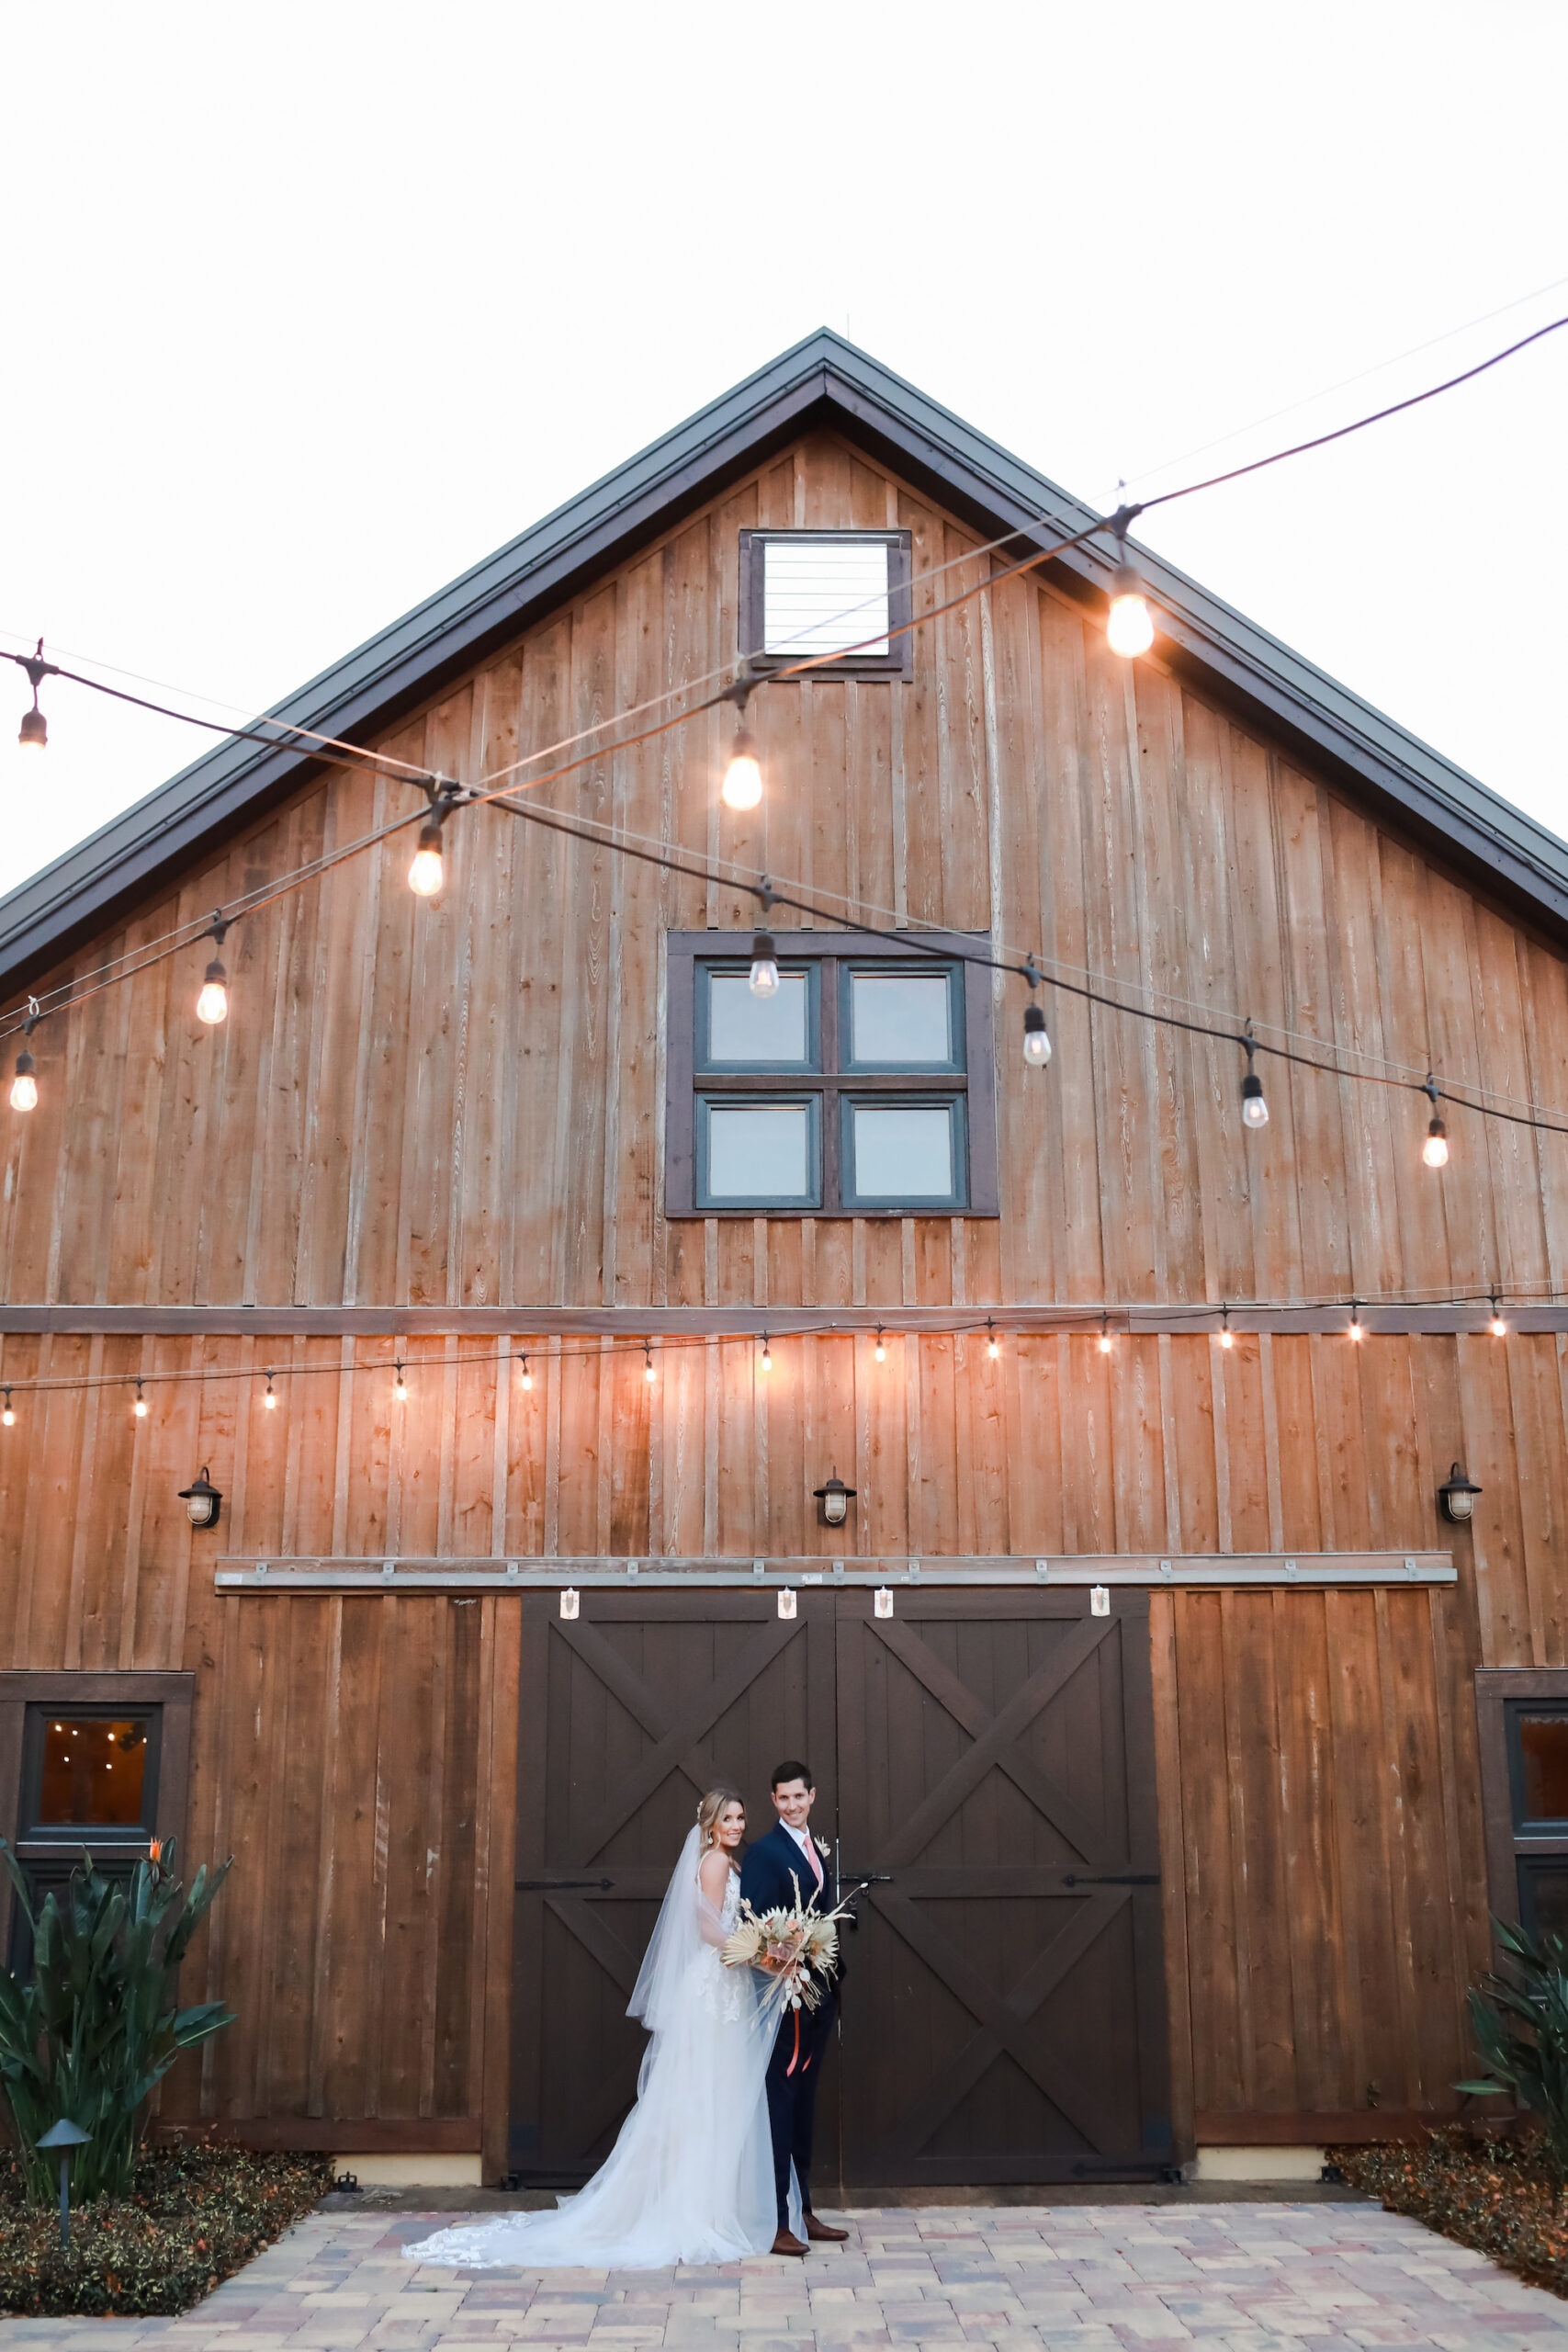 Bride and Groom Wedding Portrait in Front of Barn | Tampa Bay Photographer Lifelong Photography Studio | Venue Mision Lago Estate